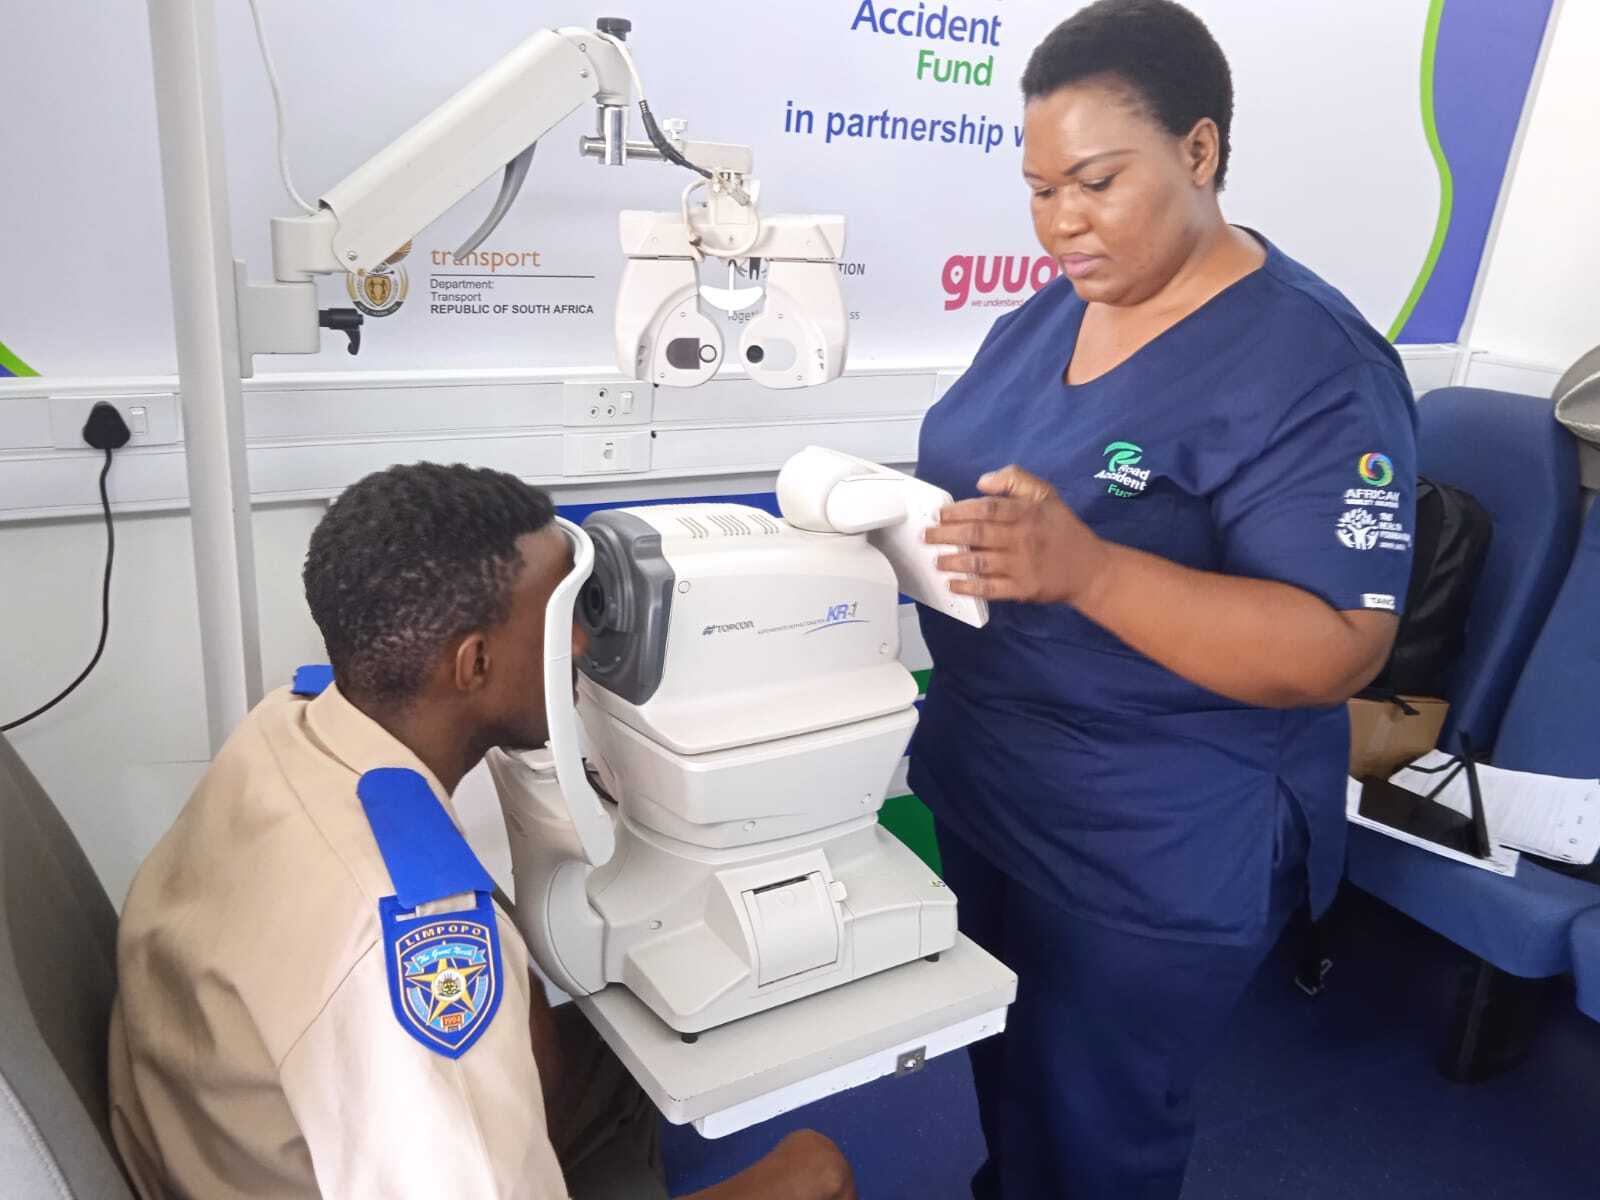 Nurse performing an eye test on a patient